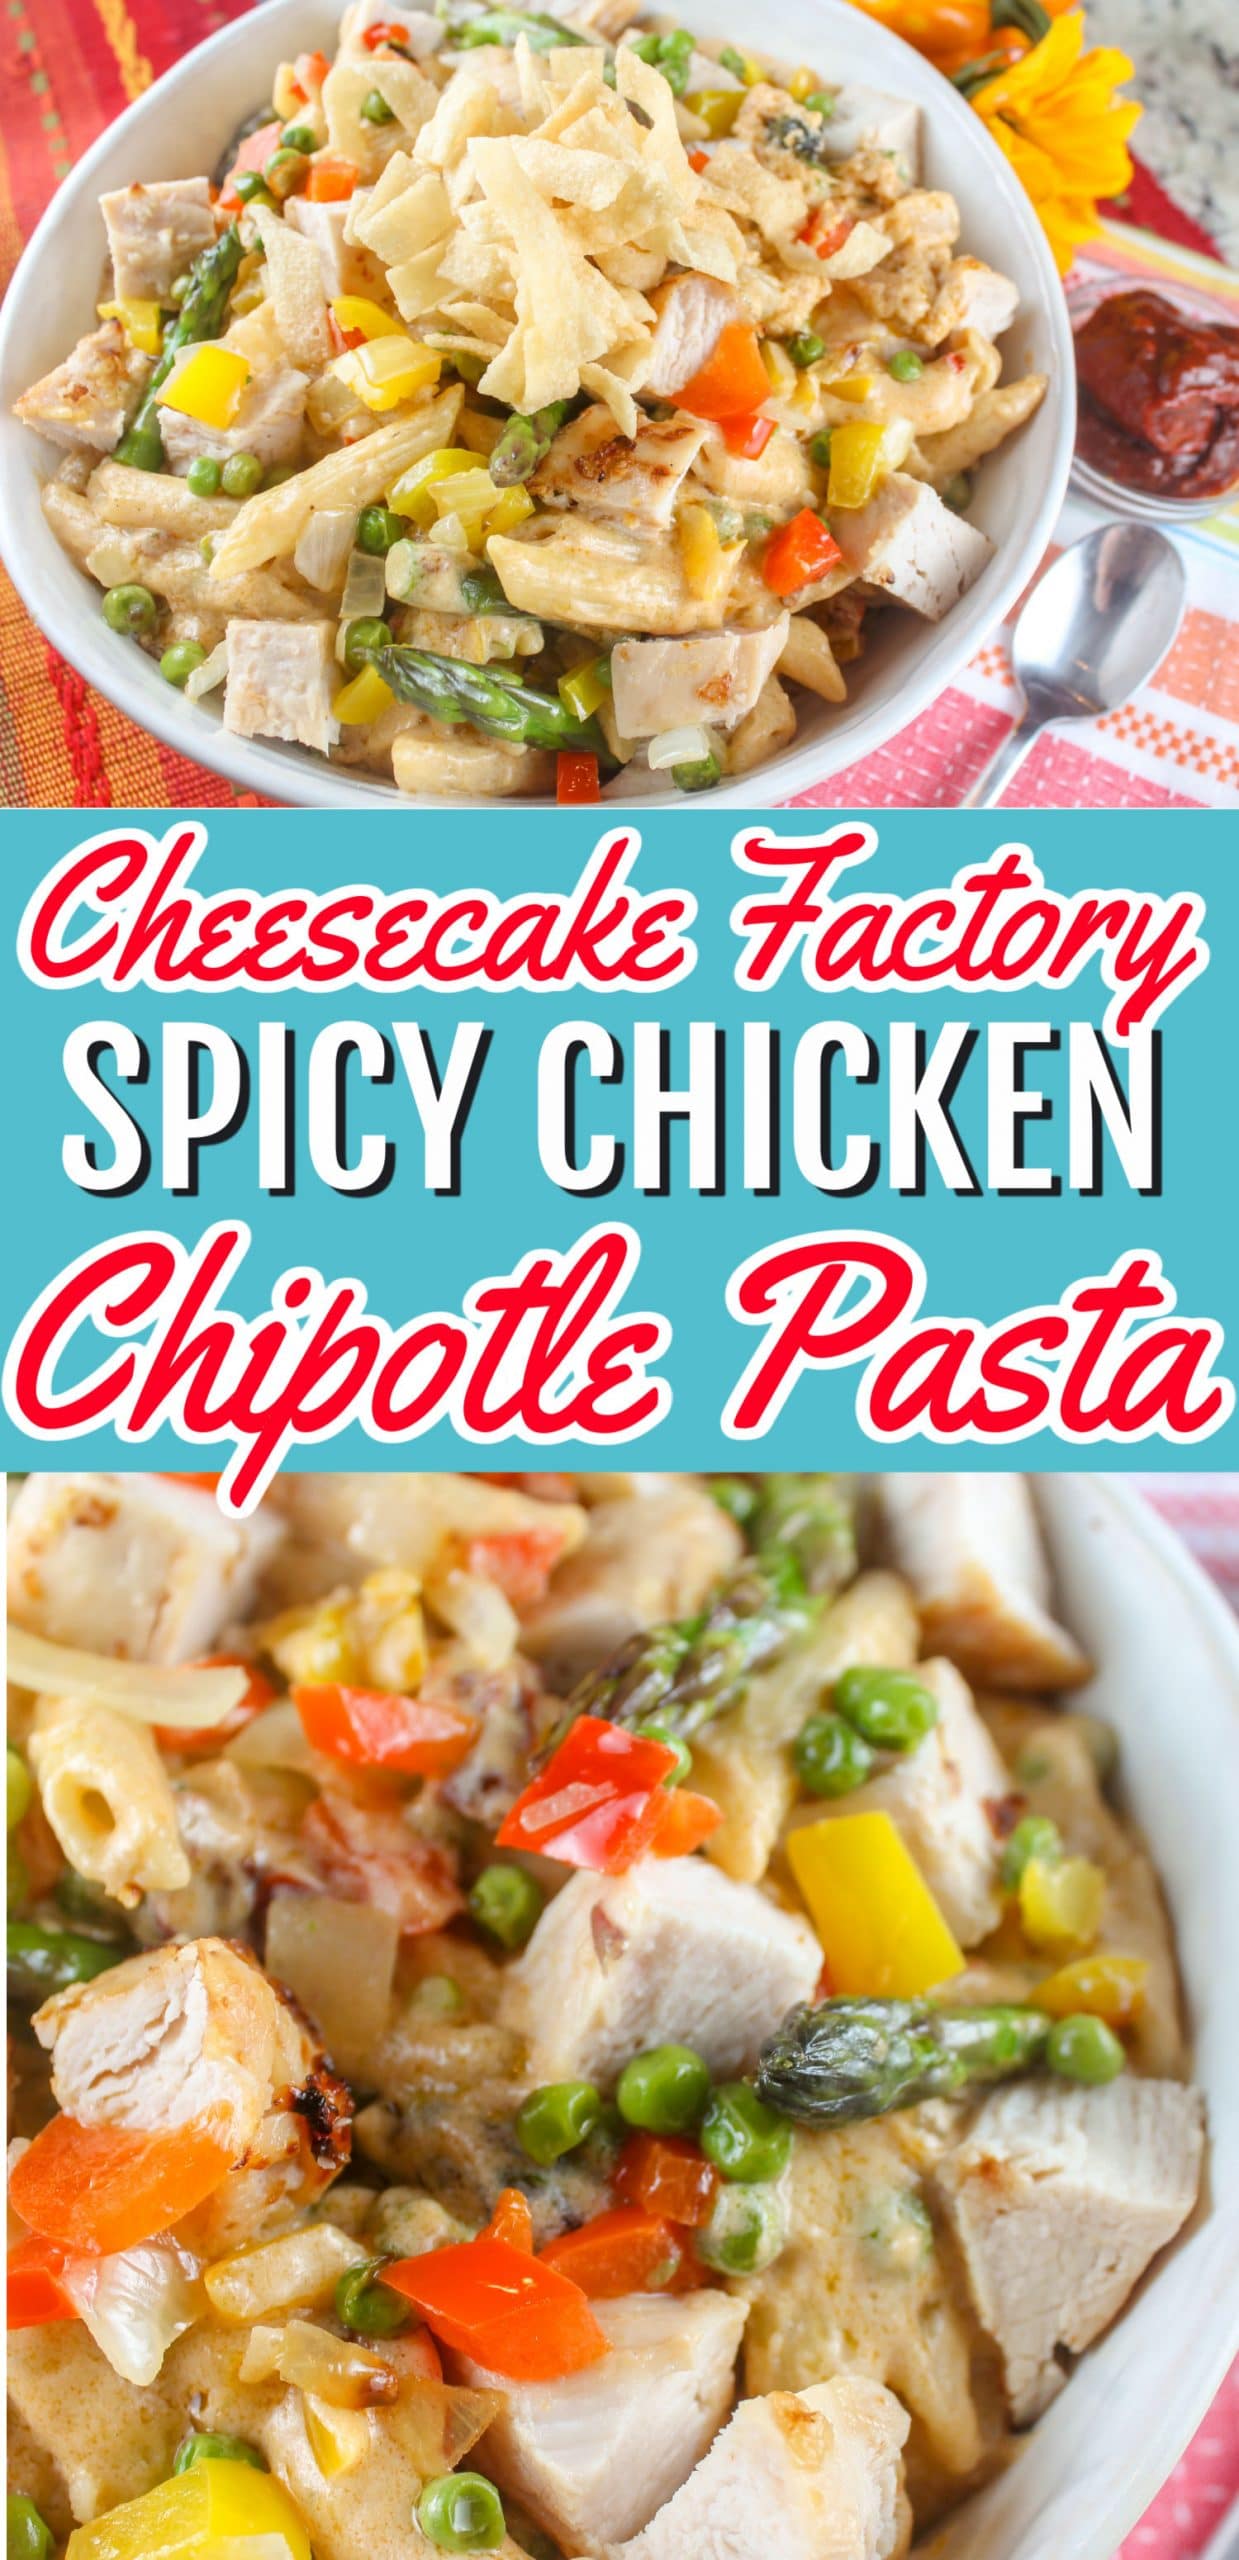 Cheesecake Factory's Spicy Chicken Chipotle Pasta is a favorite of mine - it's got tons of veggies but is also cream and yum! This copycat recipe of the chipotle chicken pasta will surely be a family favorite - and even make the kids like asparagus!  via @foodhussy